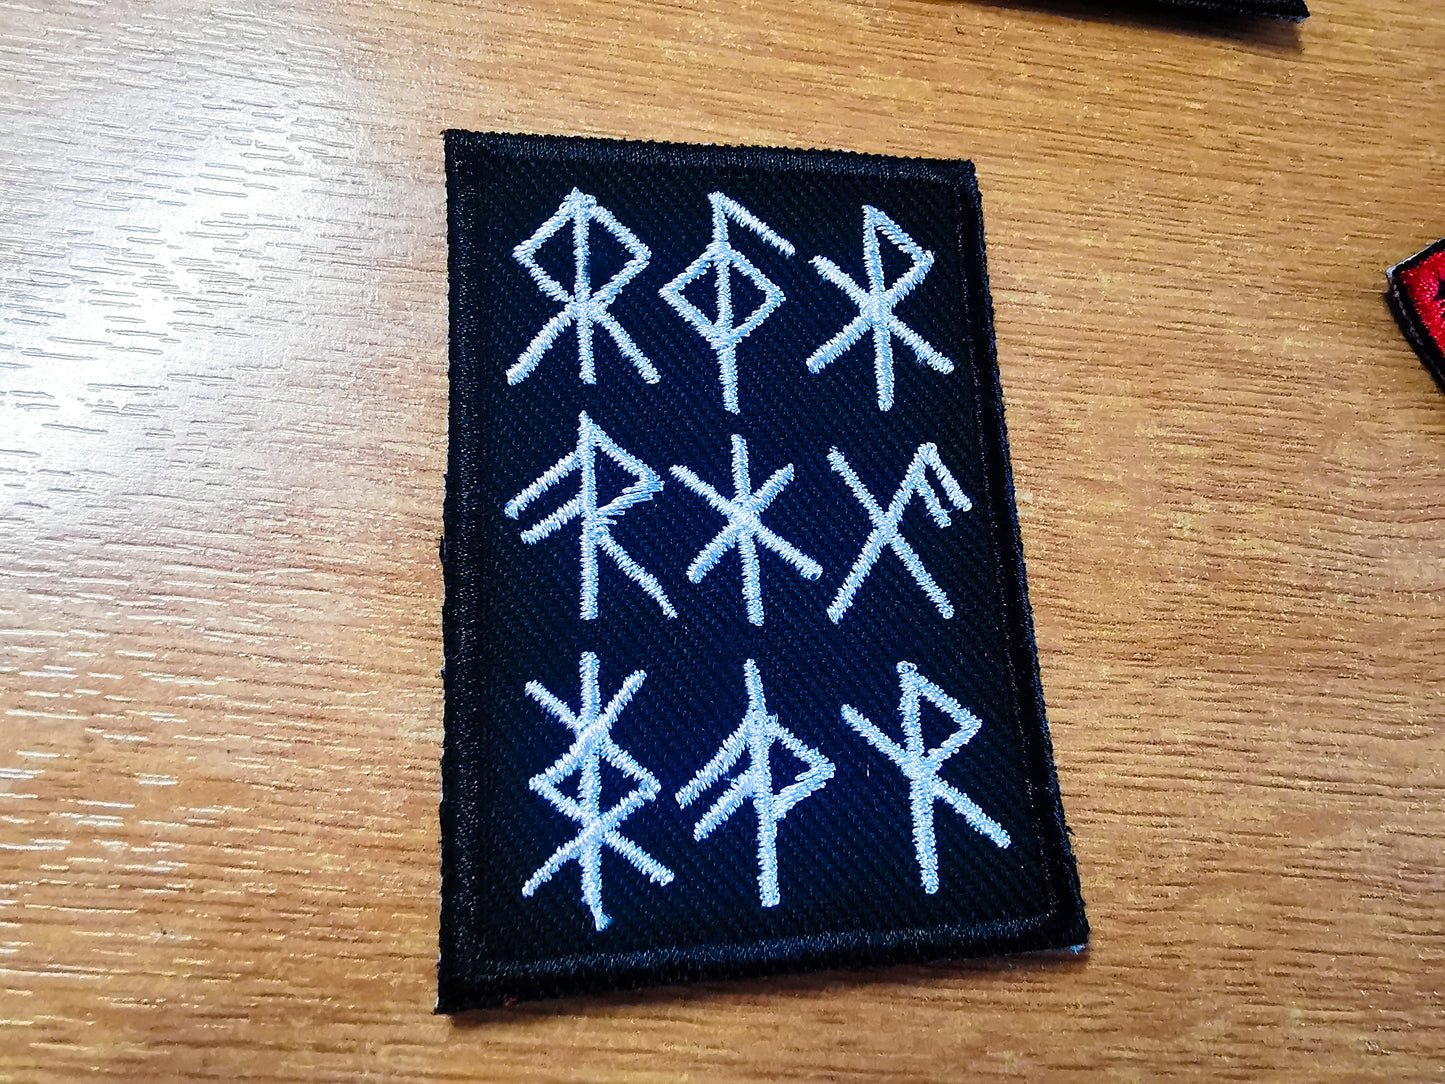 Bindrune Patch Embroidered Viking Norse Heathenry Bind Runes